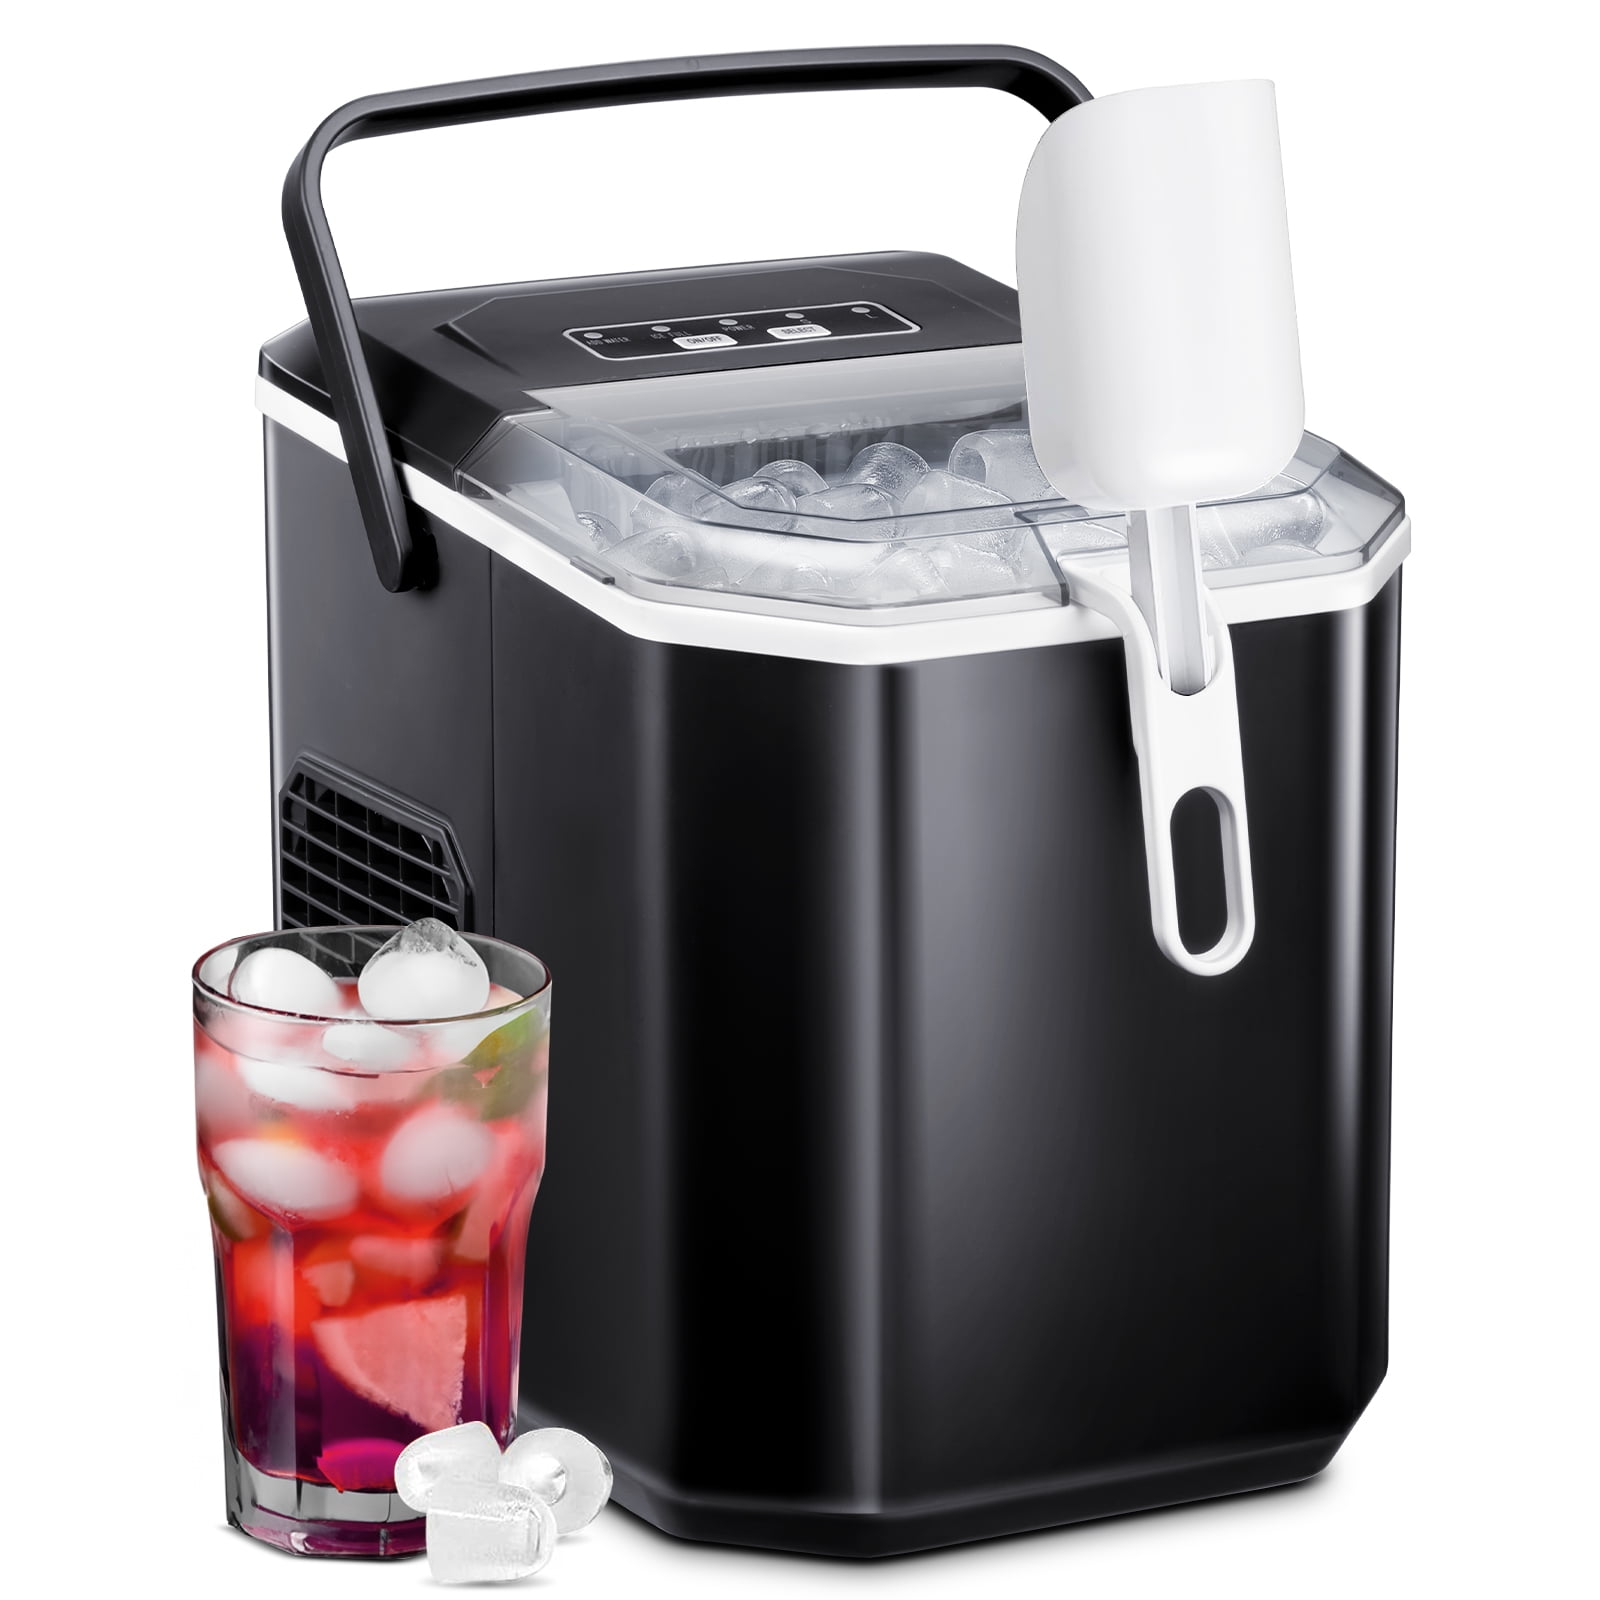 Igloo Automatic Self-Cleaning Portable Countertop Ice Maker Machine With  Handle - Black, 1 ct - Pick 'n Save